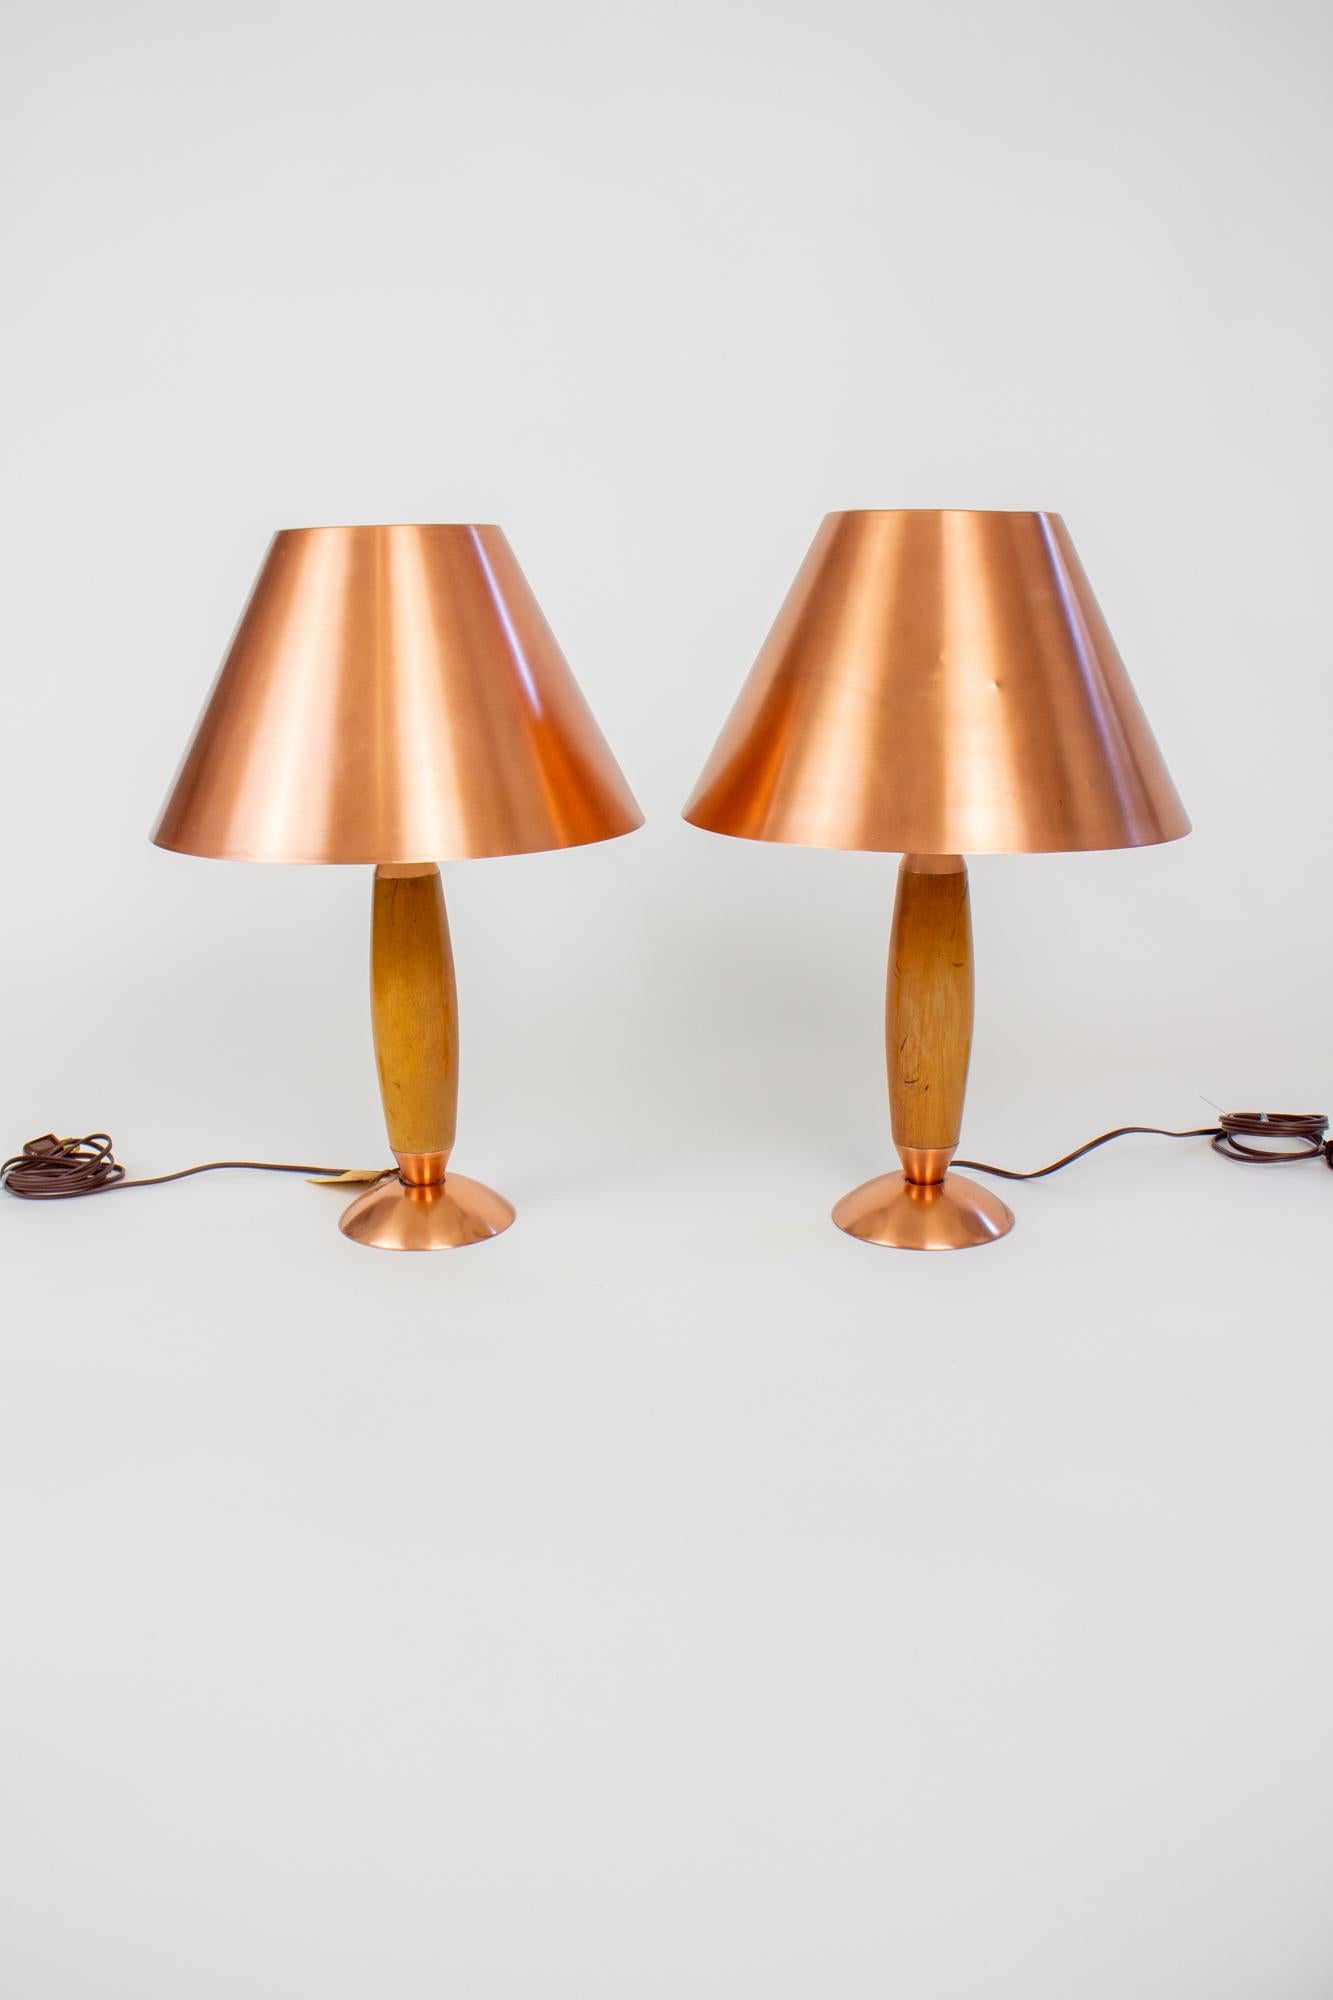 New Old Stock Lamps. They were hidden for 60 years in storage, and have been hand refinished and rewired. Solid wood and copper with original copper shade. Part of the 